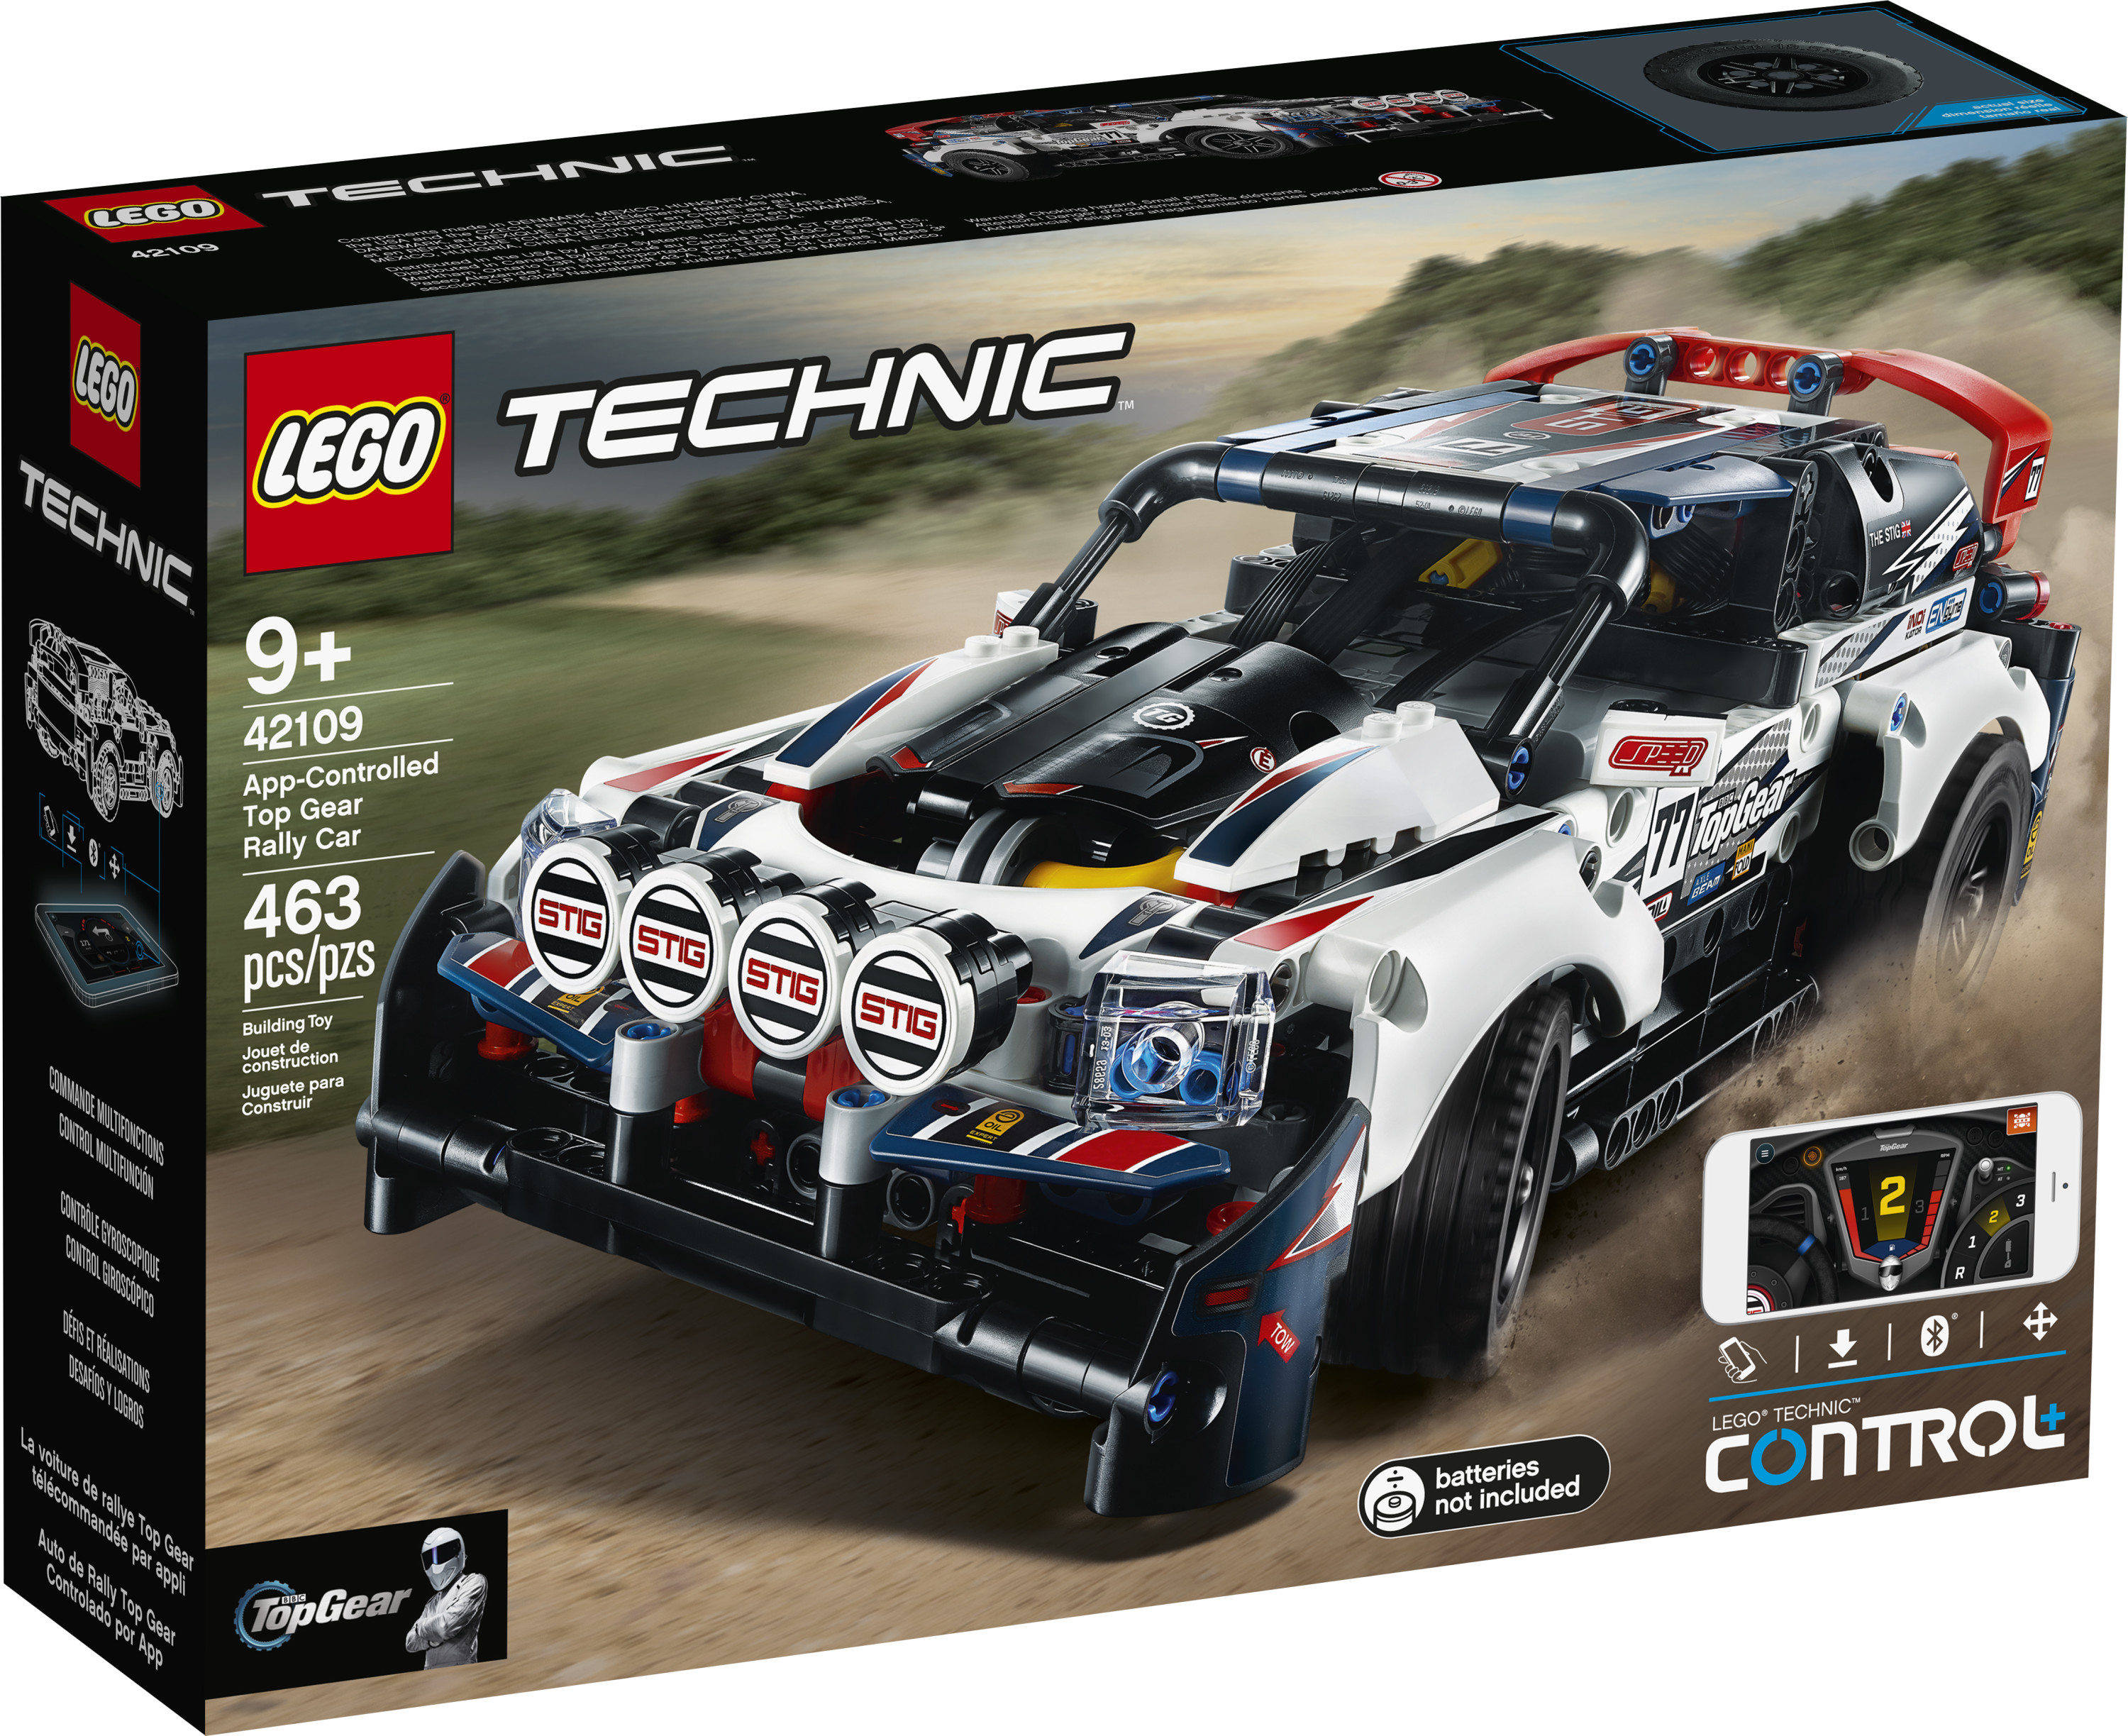 LEGO Technic App-Controlled Top Gear Rally Car 42109 - image 4 of 5